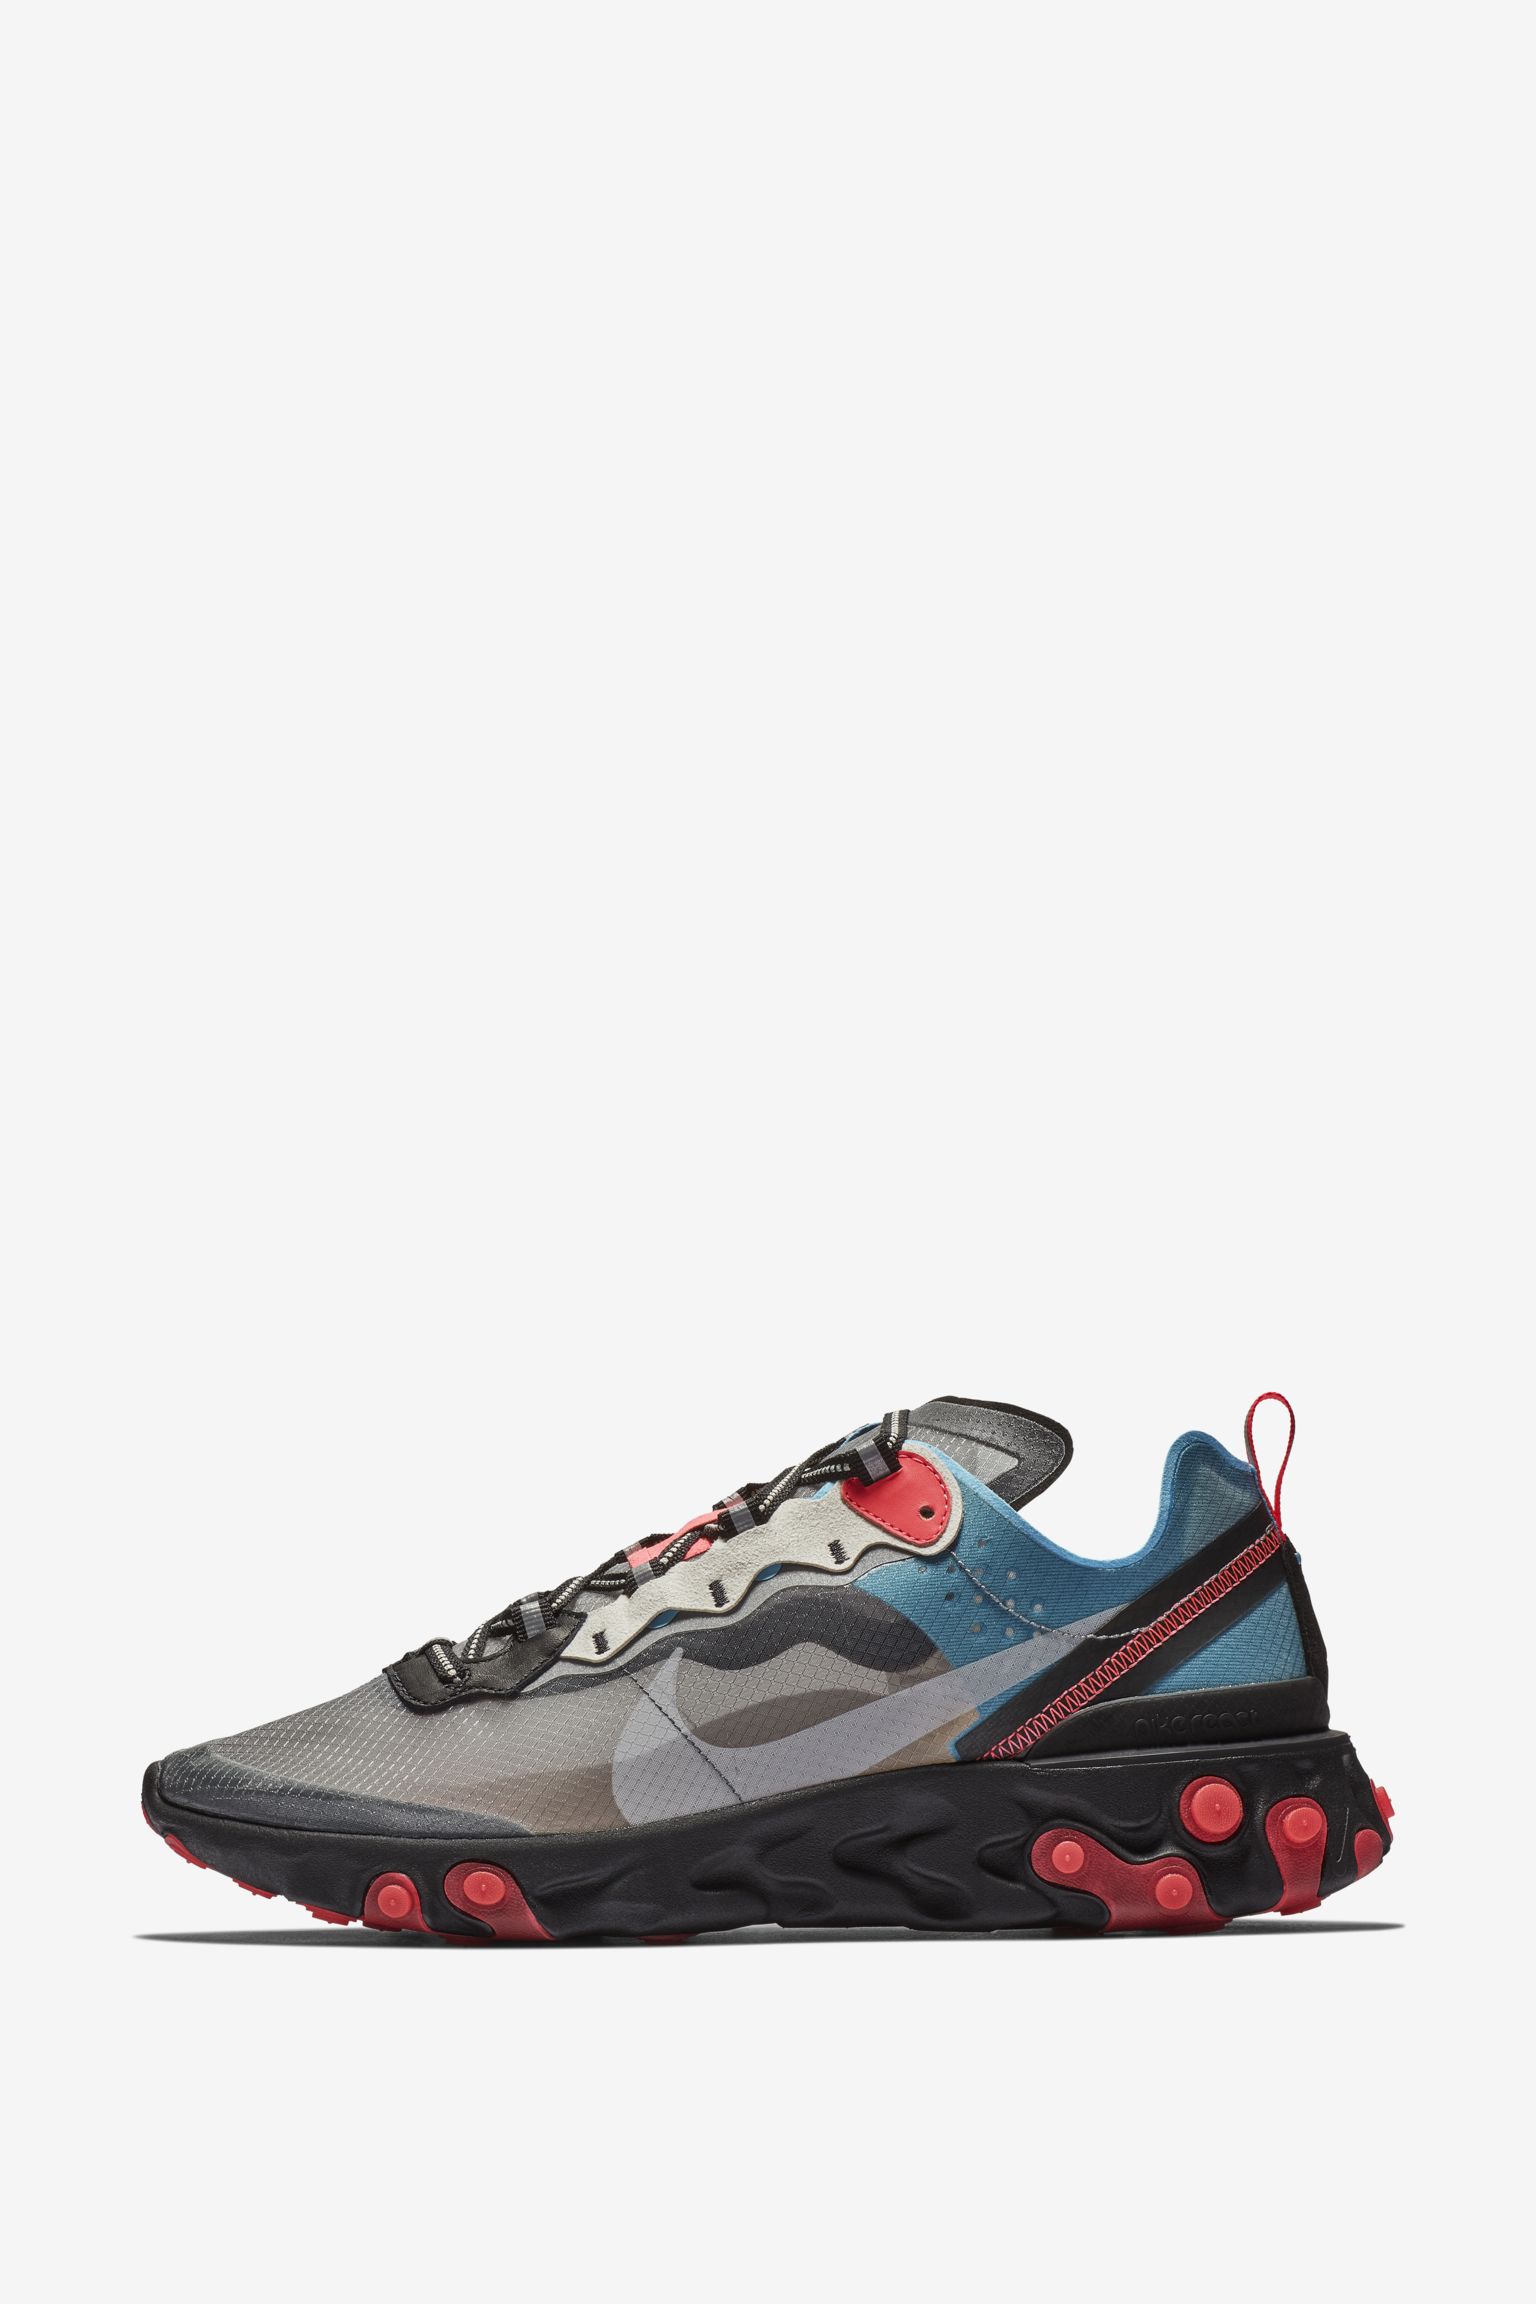 react element 87 release date